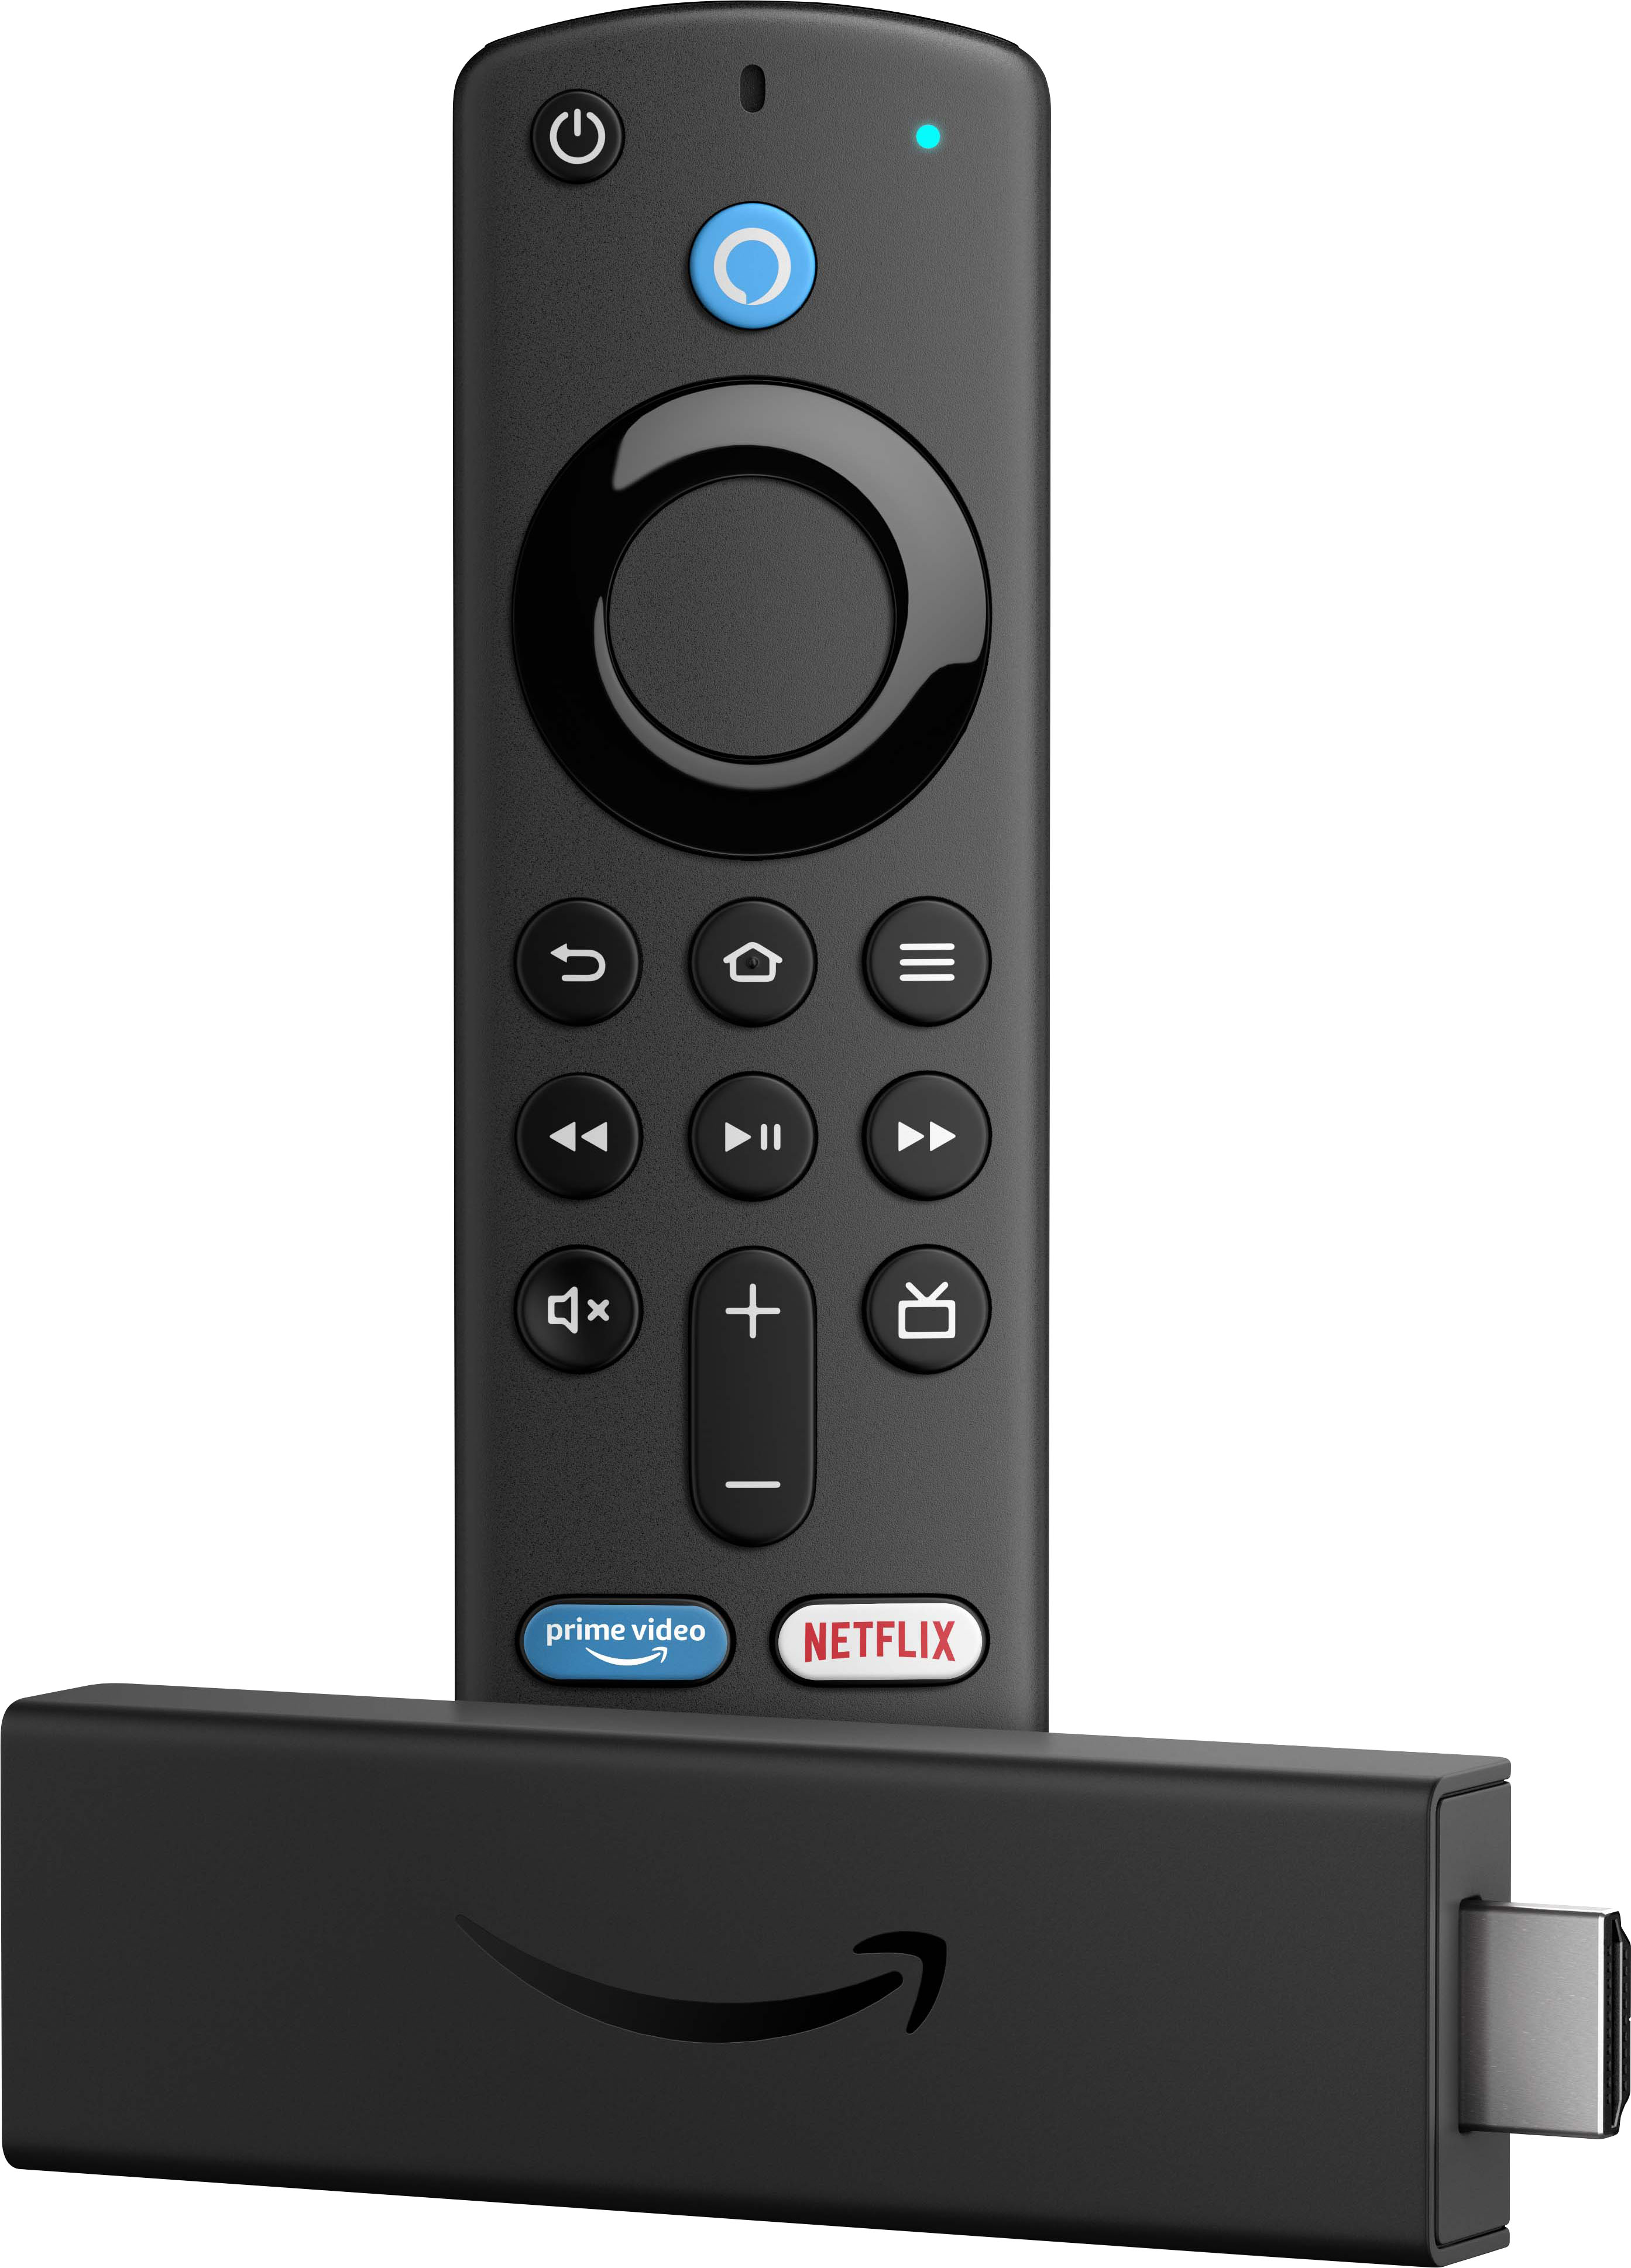 Amazon Fire TV Stick 4K with Alexa Voice Remote, Dolby Vision, HD Streaming  Media Player (includes TV controls) Black B08XVYZ1Y5 - Best Buy